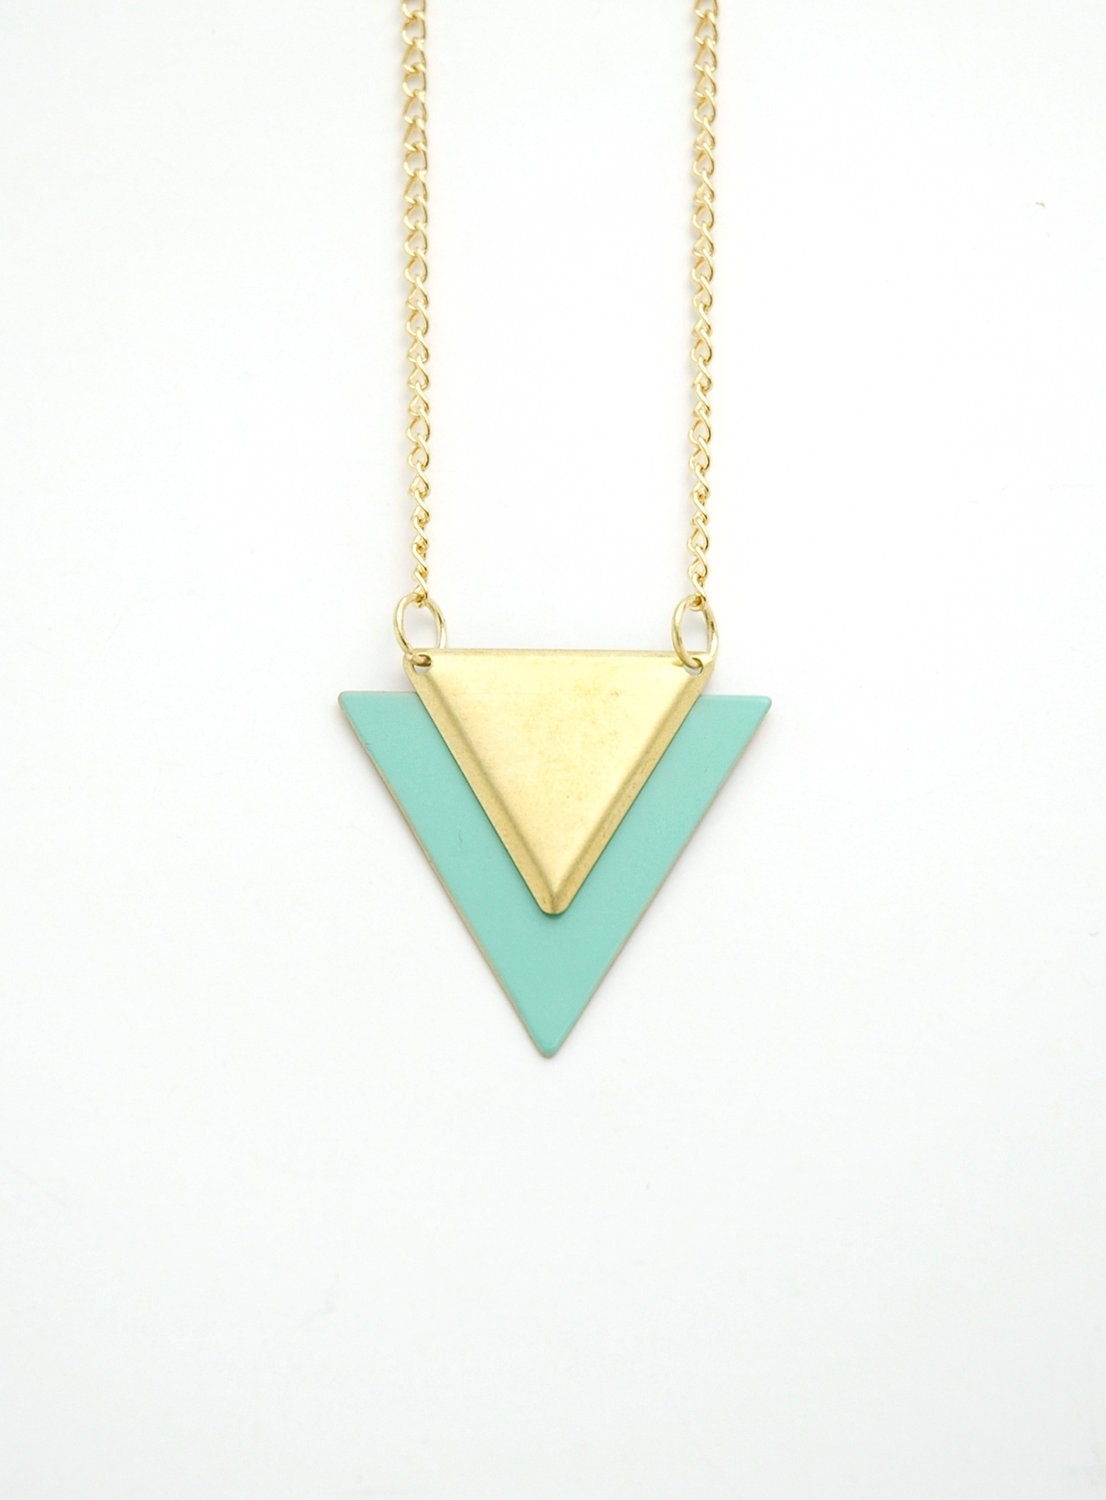 Minimalist Geometric Triangle Long Necklace - Mint Green Hand Dyed Modern Raw Brass Jewelry  - Gold Plated Chain